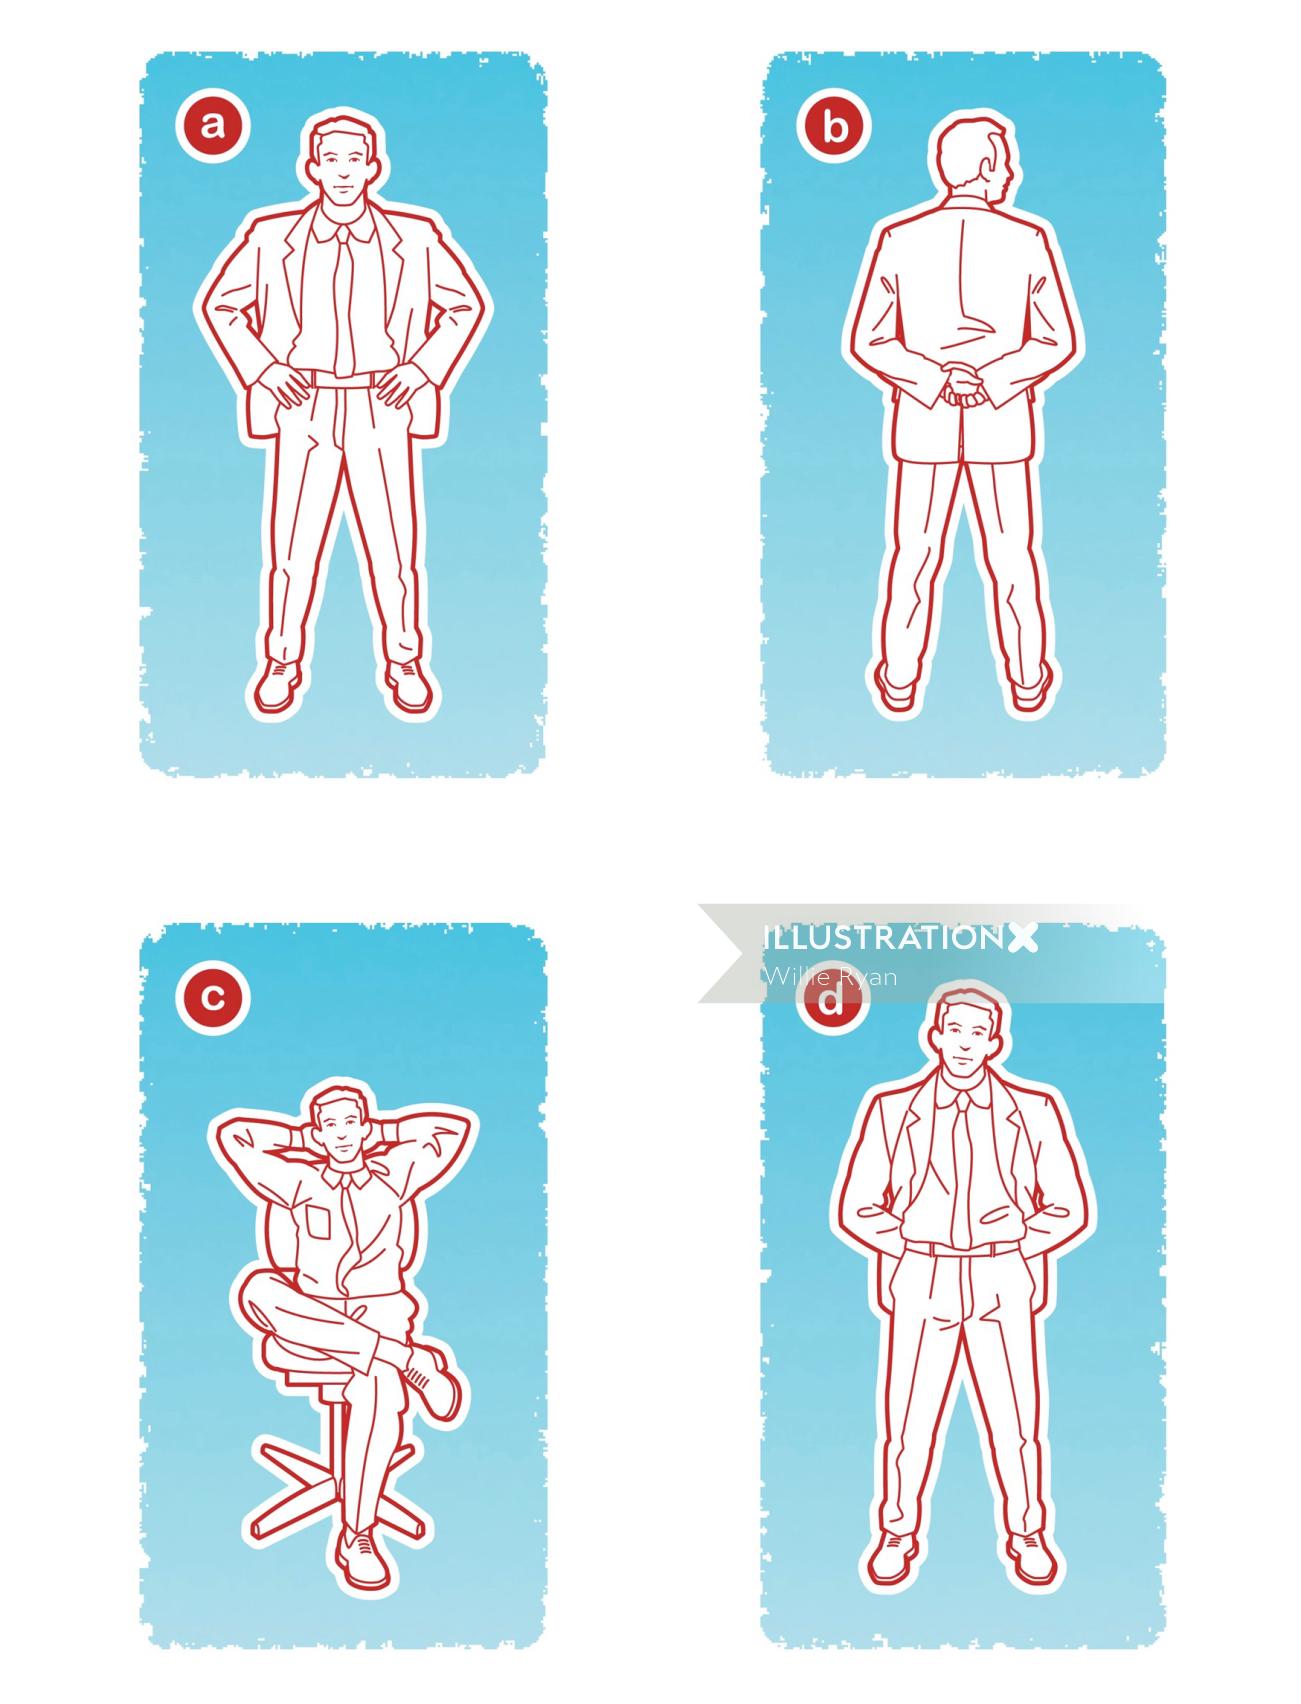 How to wear suit humorous info-graphic diagrams